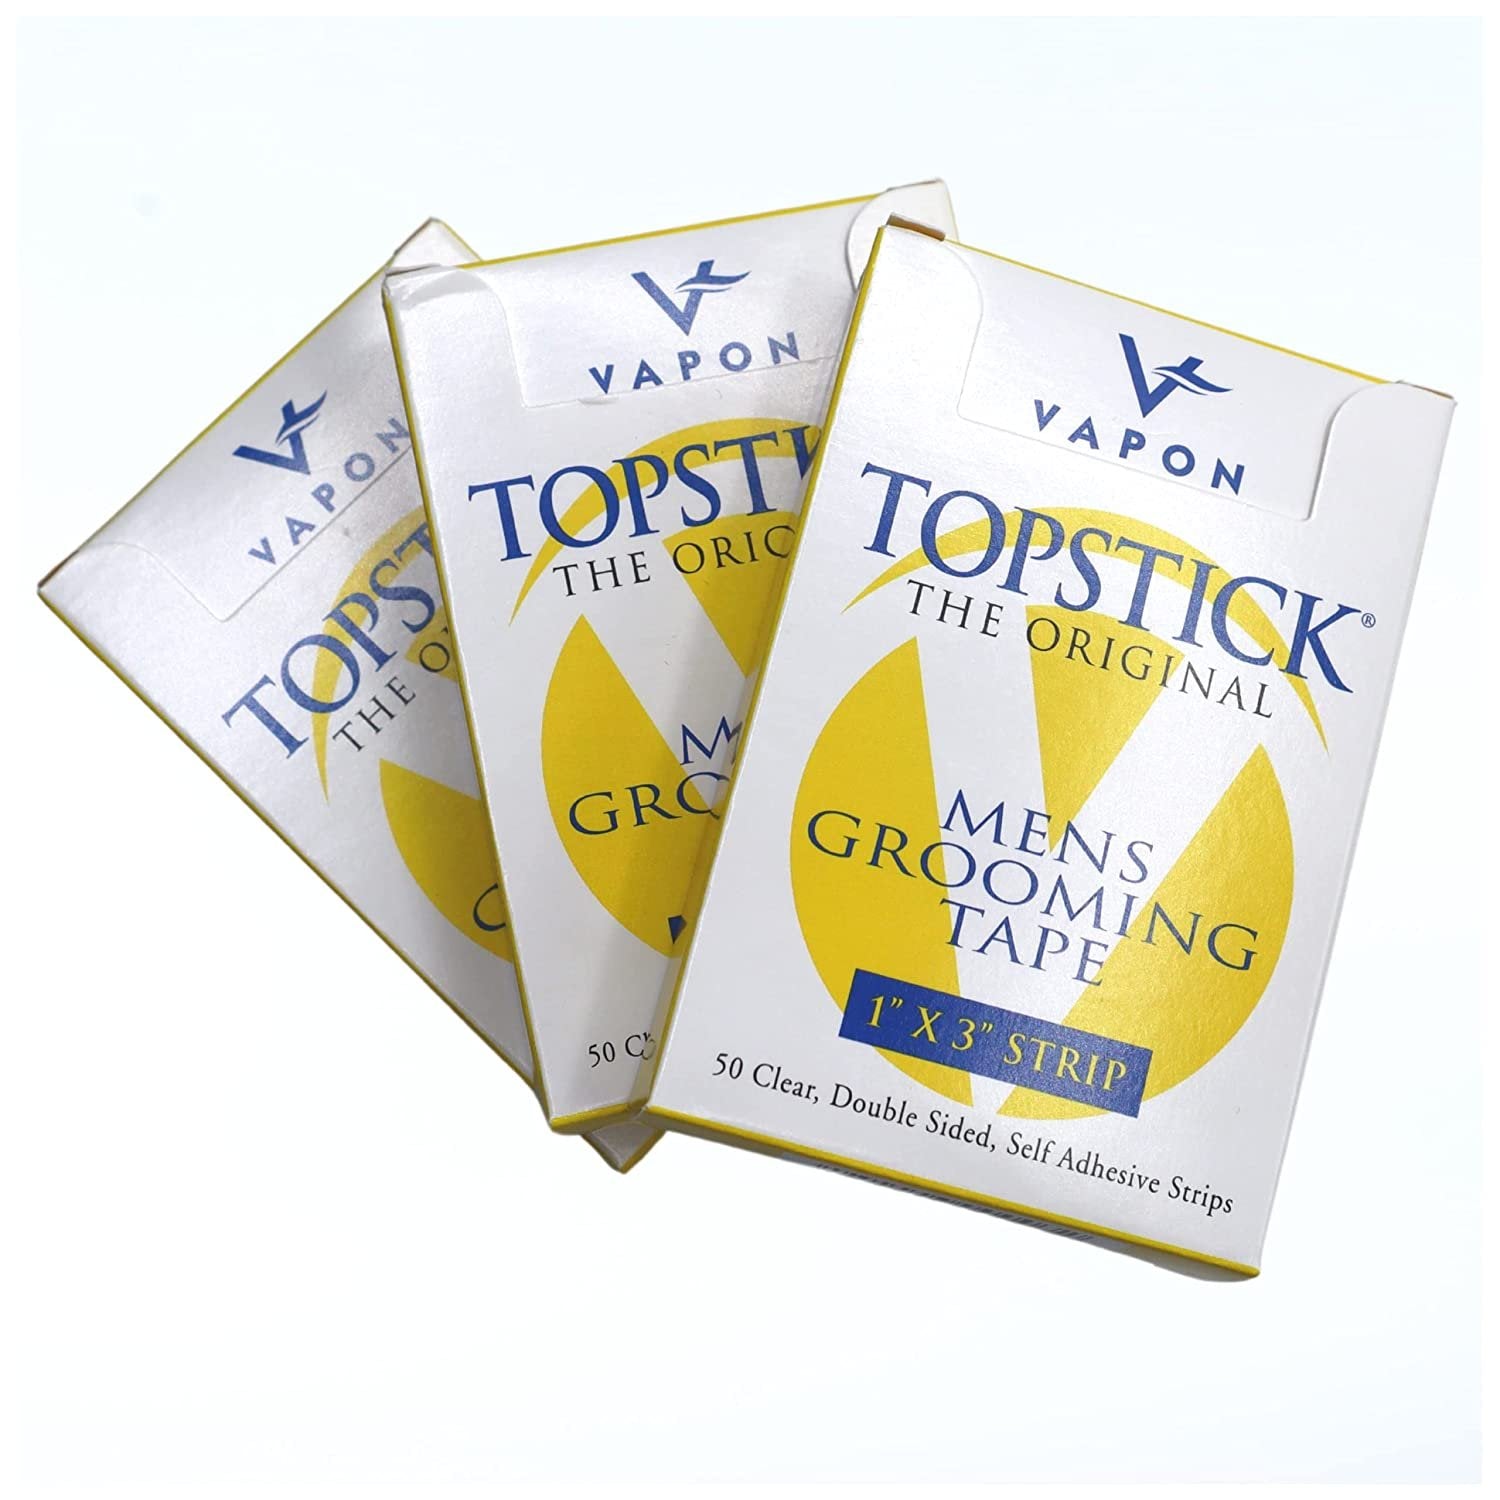 Vapon Topstick - The Original Men's Grooming Tape - 150 Count 3 Boxes - 1" x 3" Double Sided, Self Adhesive, Clear Tape for Toupee and Wig Adhesion - Hypo Allergenic, Waterproof, and Latex Free